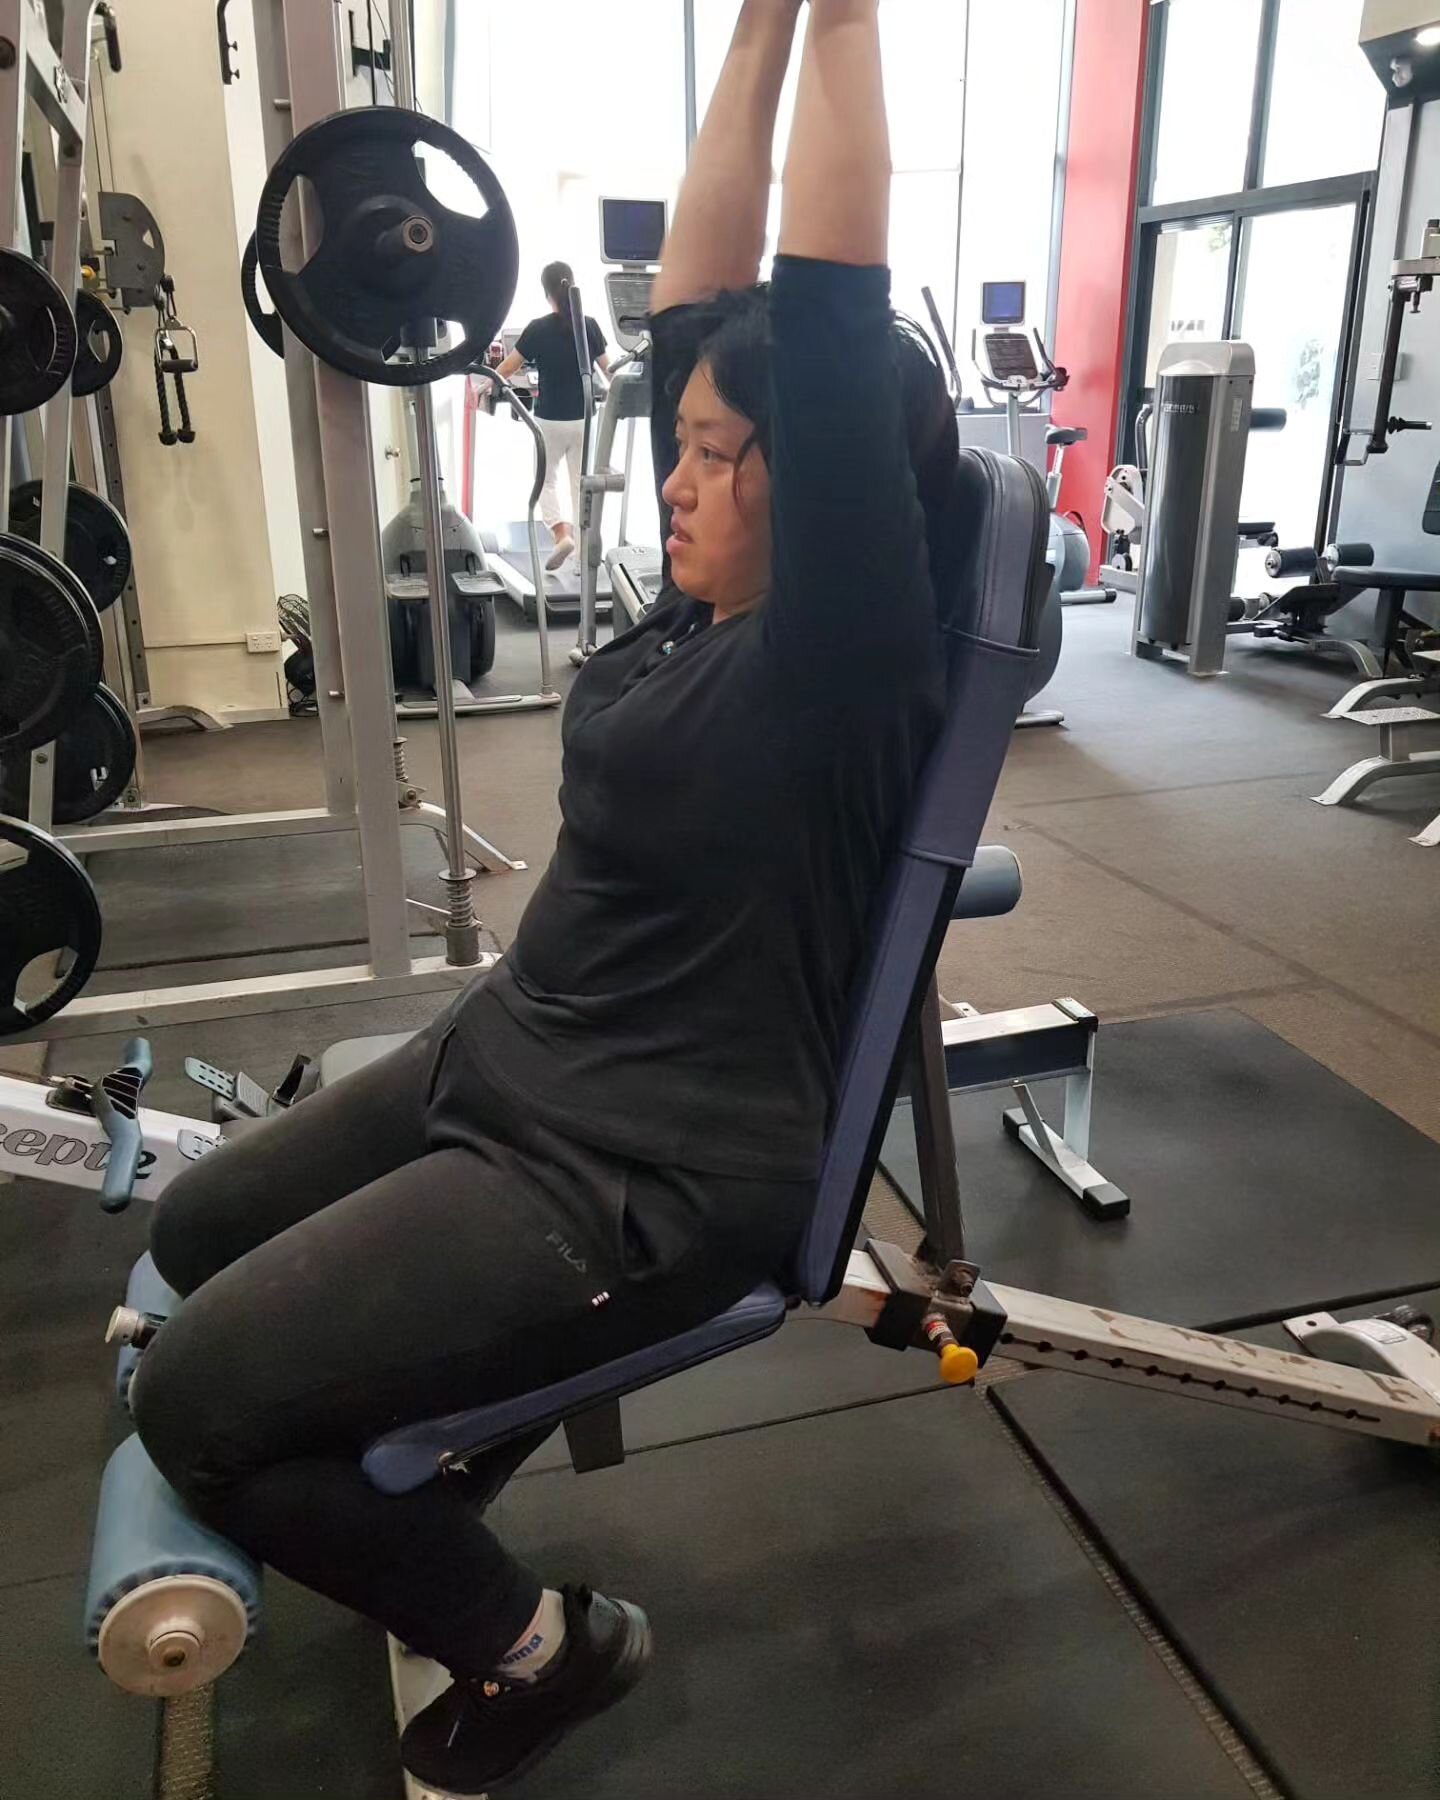 Fransisca has been a long time client of Strength to Strength, working with Isabel and now working with Naomi for the past 1.5 years. 
&quot;In my time working with Fransisca I have seen her become more confident and willing to try new exercises. We 